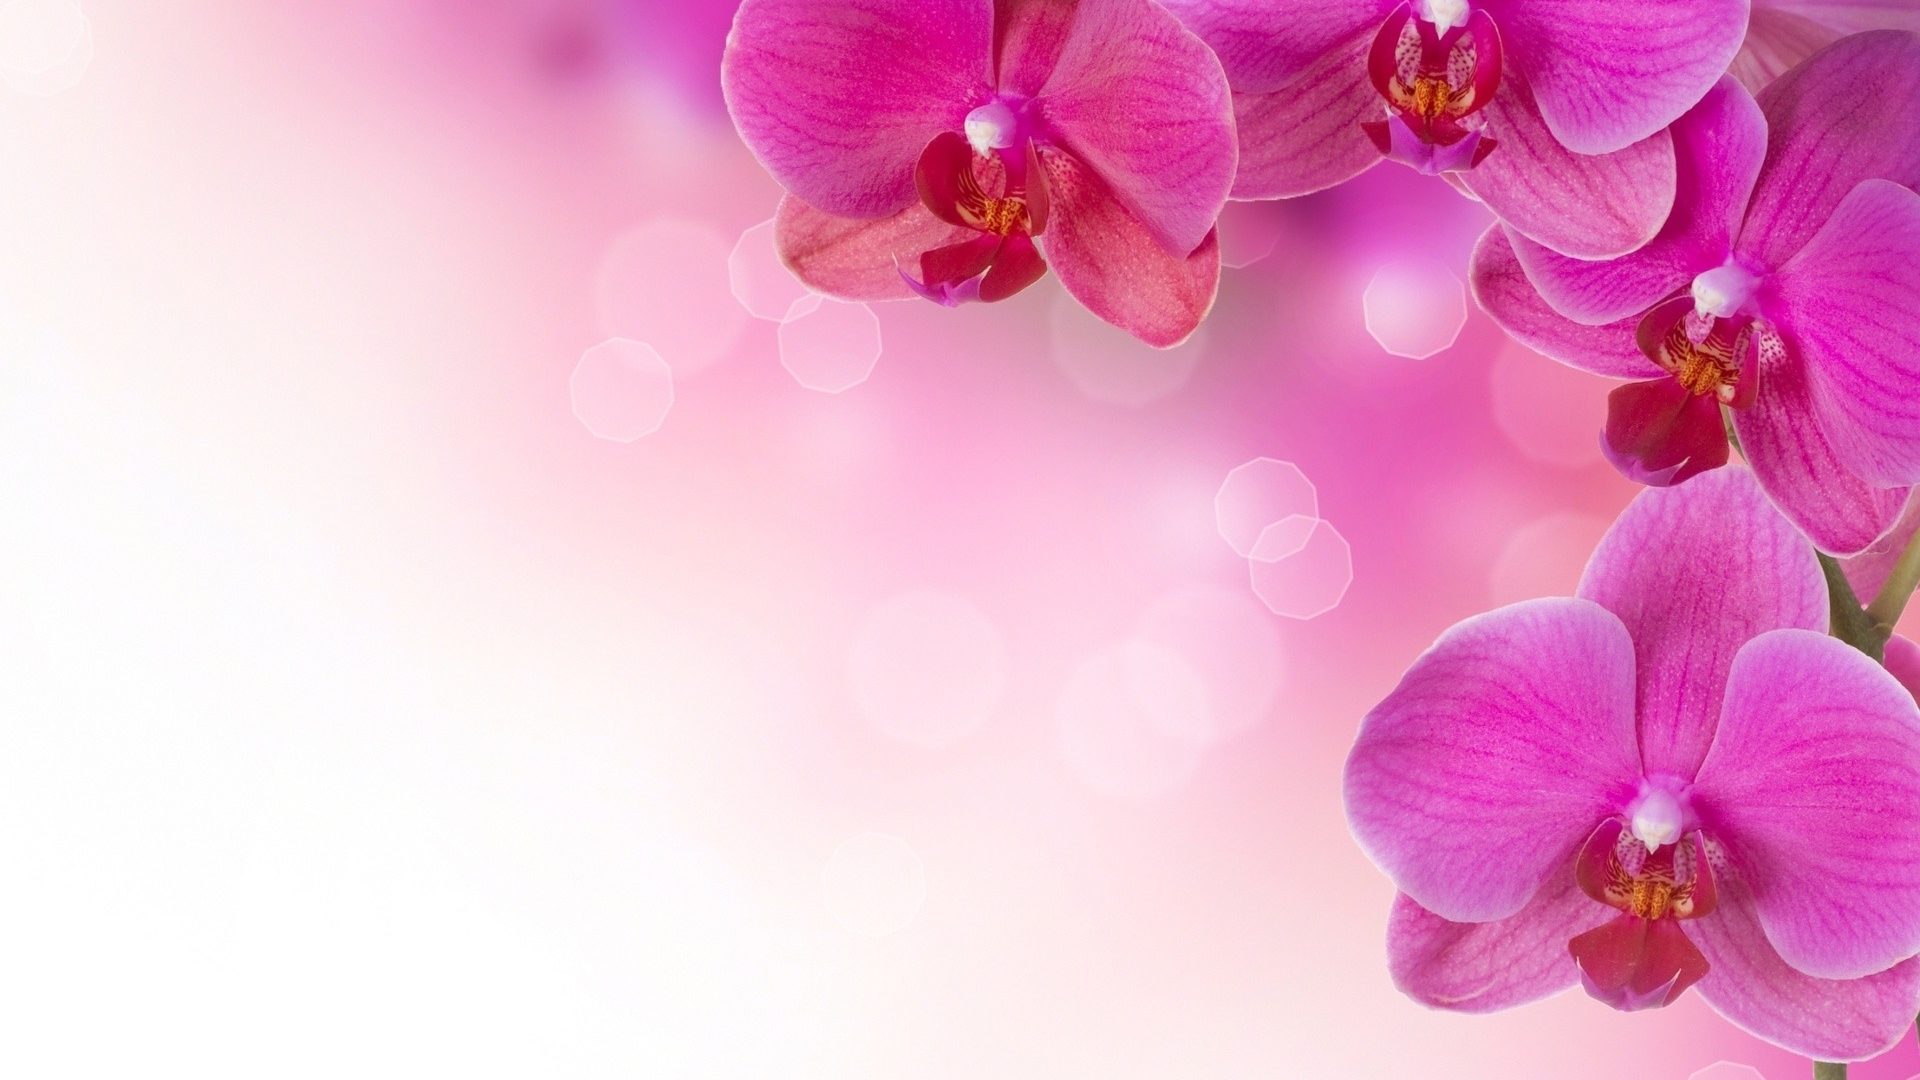 Soft Tag wallpapers: Flowers Pink Abstract Soft Wallpaper Hd Black ...